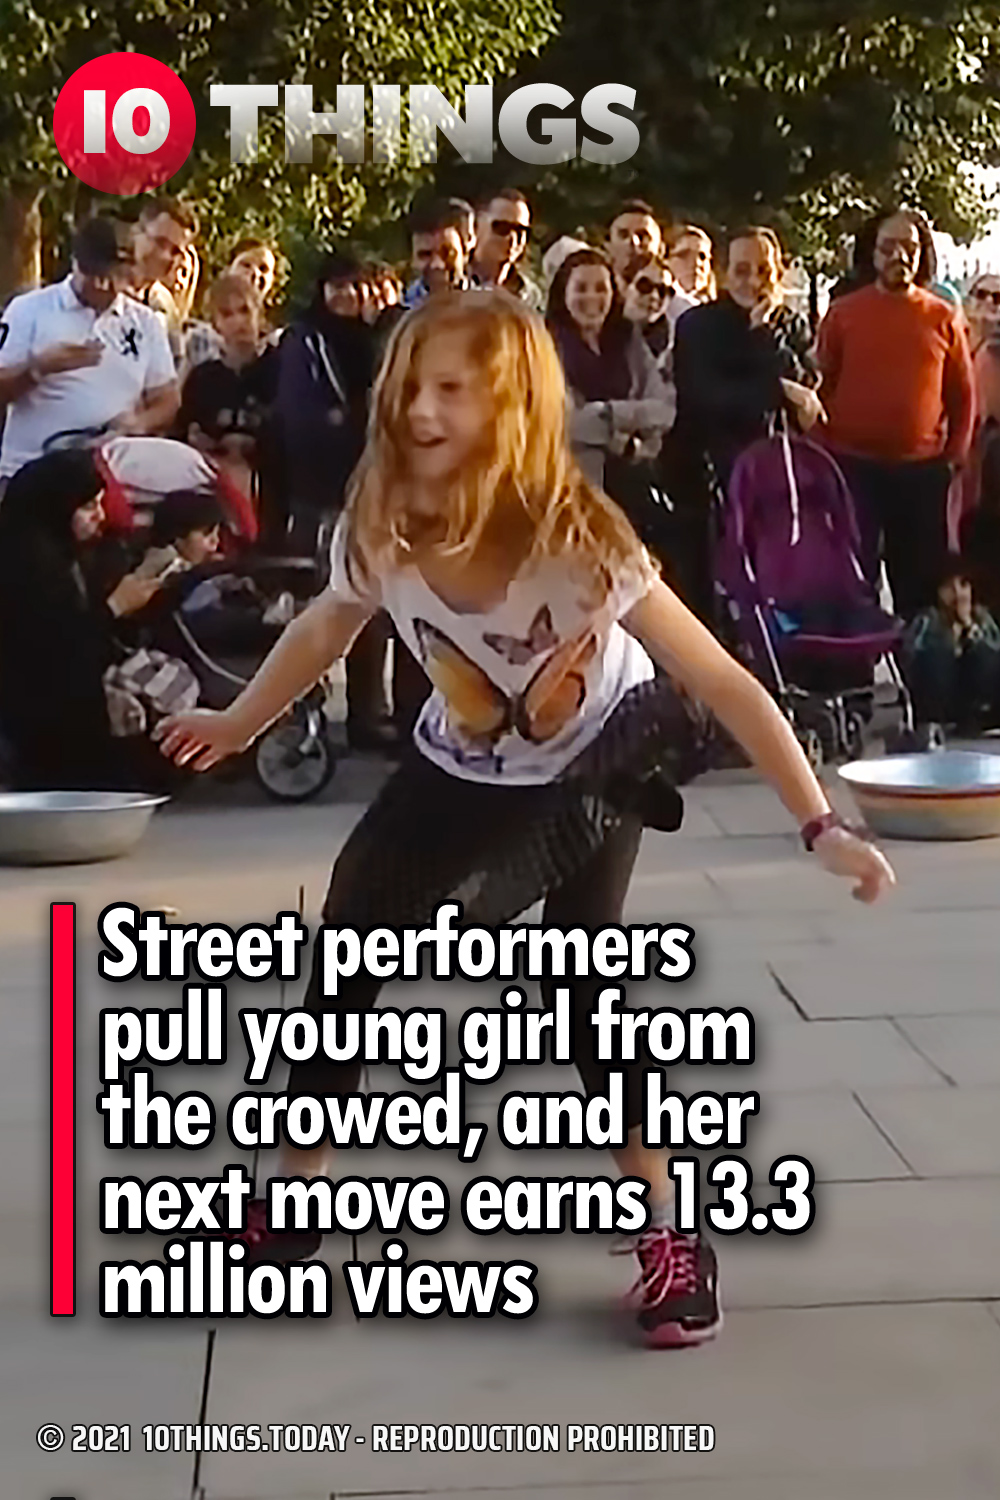 Street performers pull young girl from the crowed, and her next move earns 13.3 million views